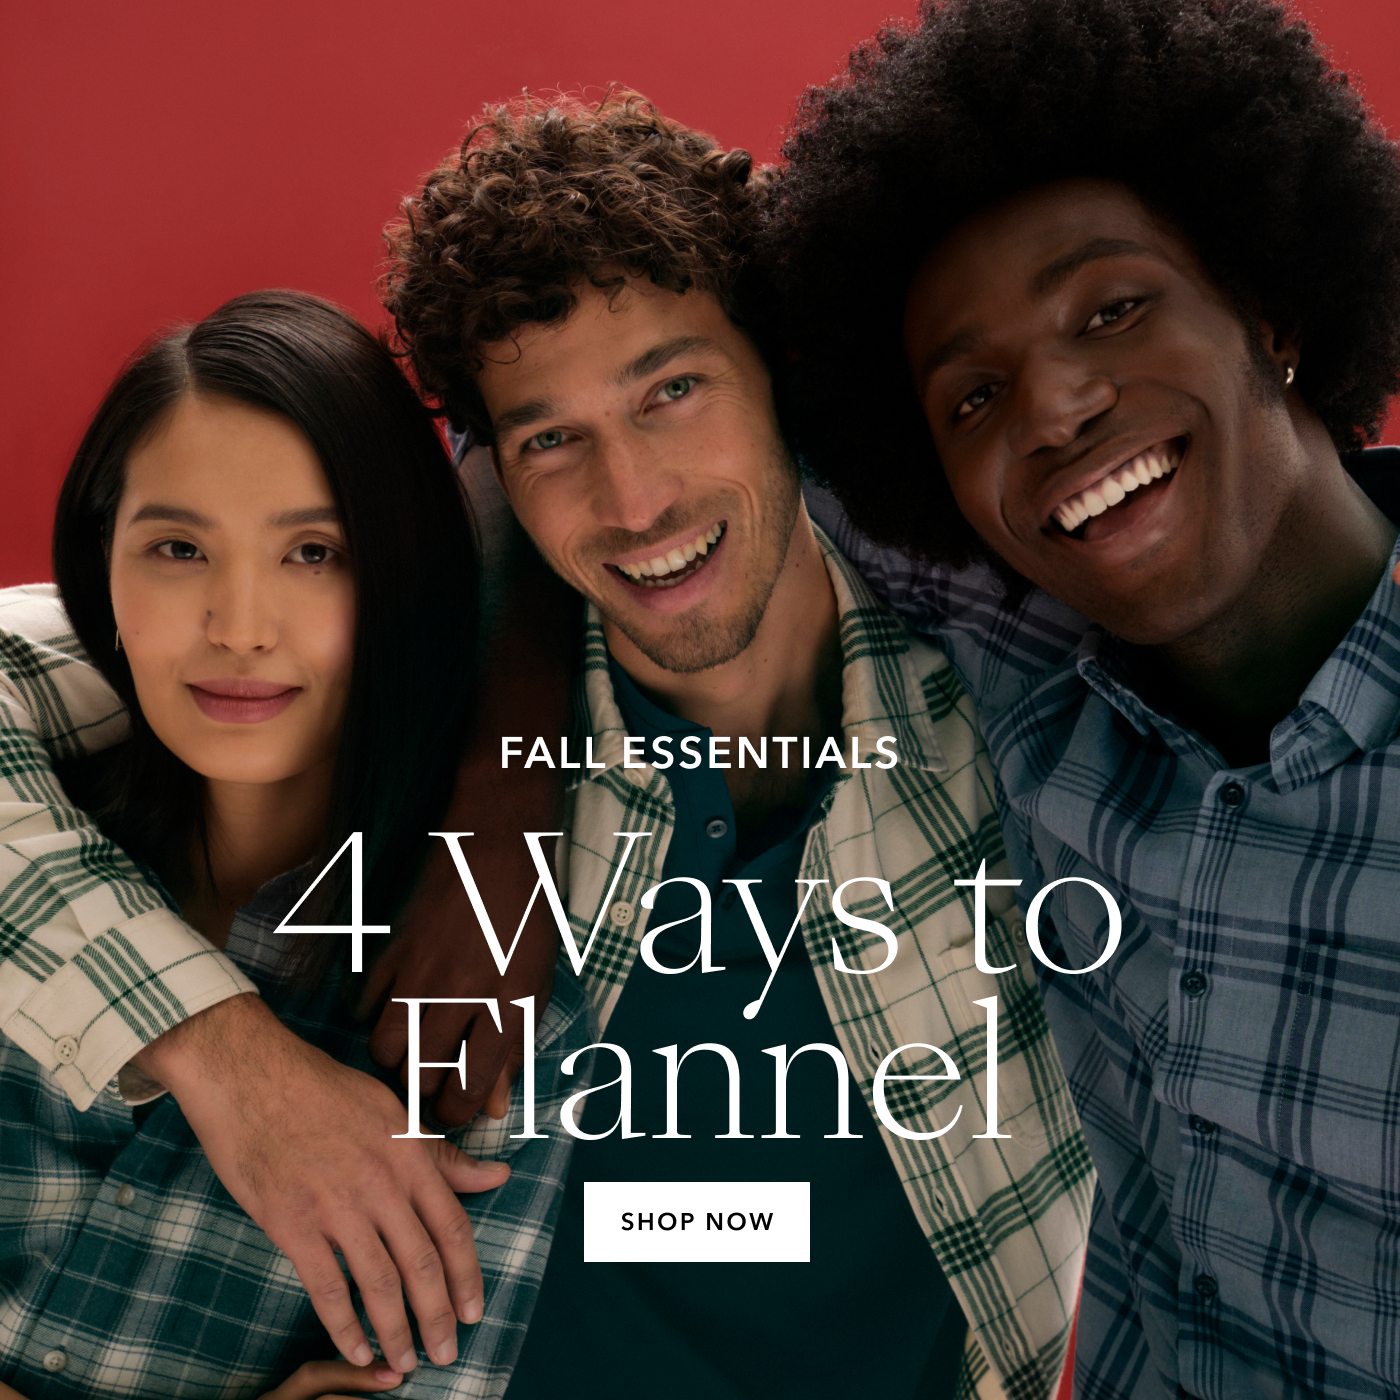 4 Ways to Flannel Shop Now